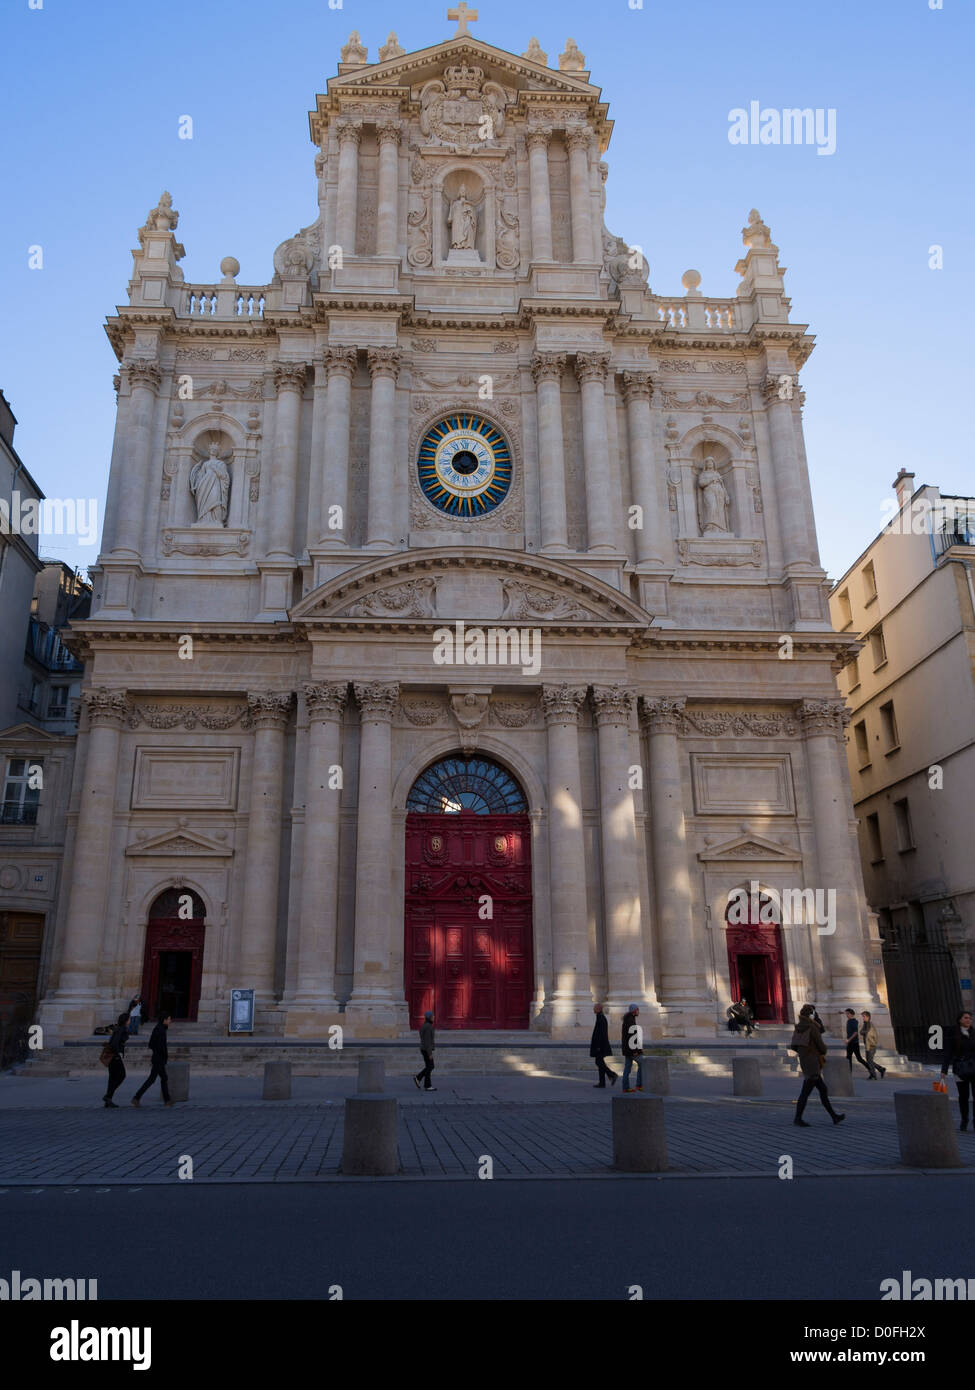 Church of Saint-Paul-Saint-Louis, Paris. 17th century church constructed for the Jesuits by Louis XIII Stock Photo